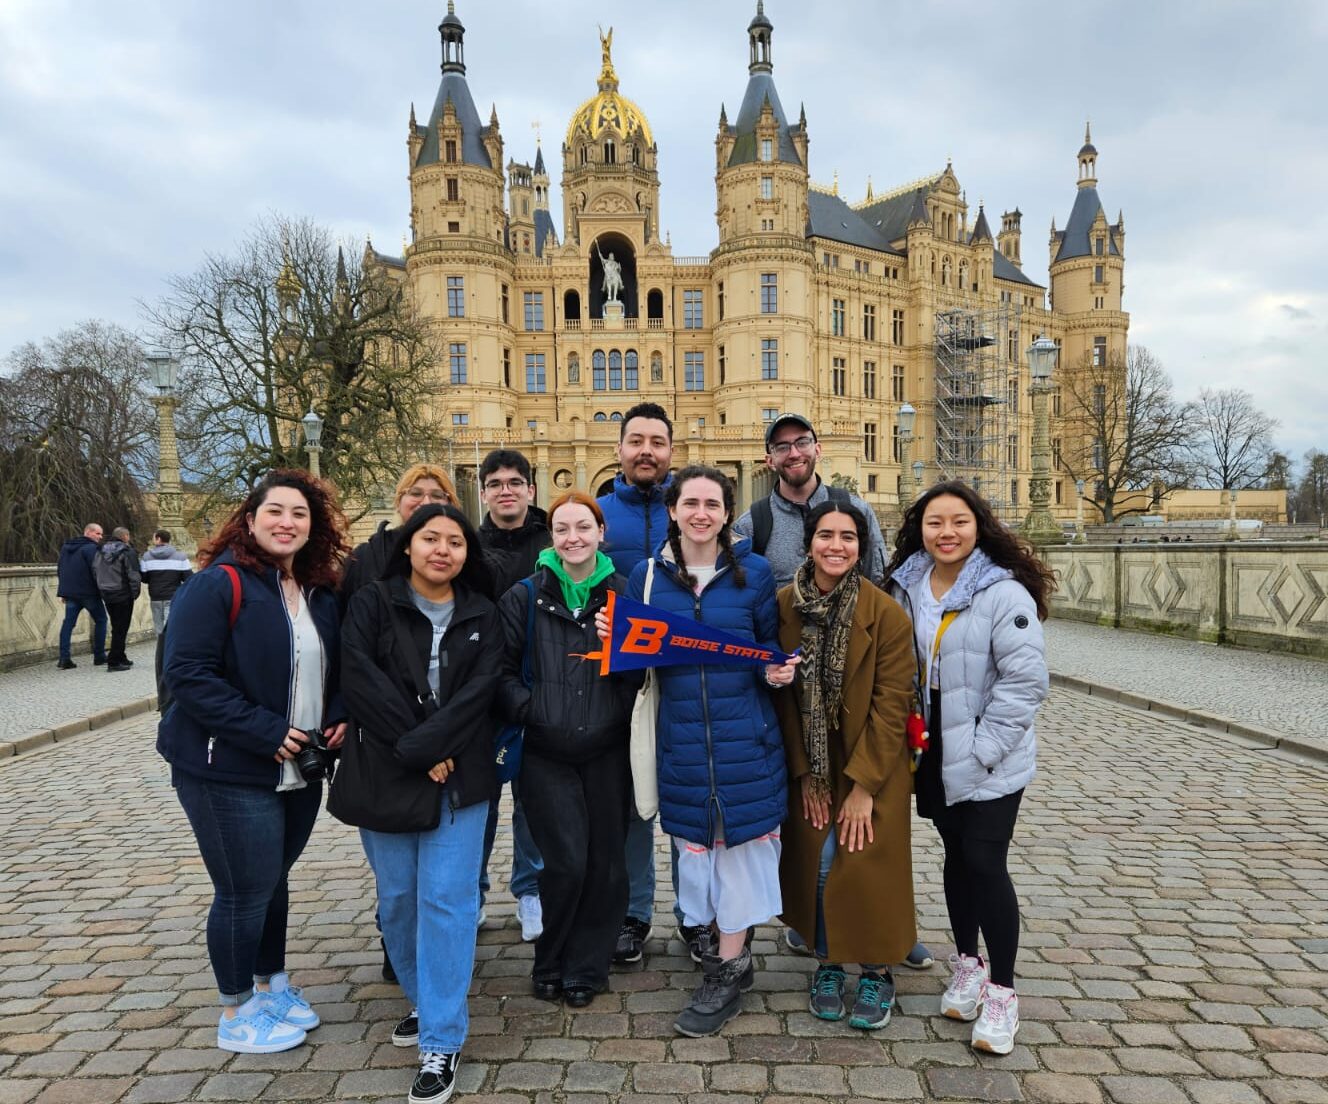 Tori (middle holding a BSU flag) with friends in front of a castle in in Schwerin, Germany. Photo Credits: Tori Simon